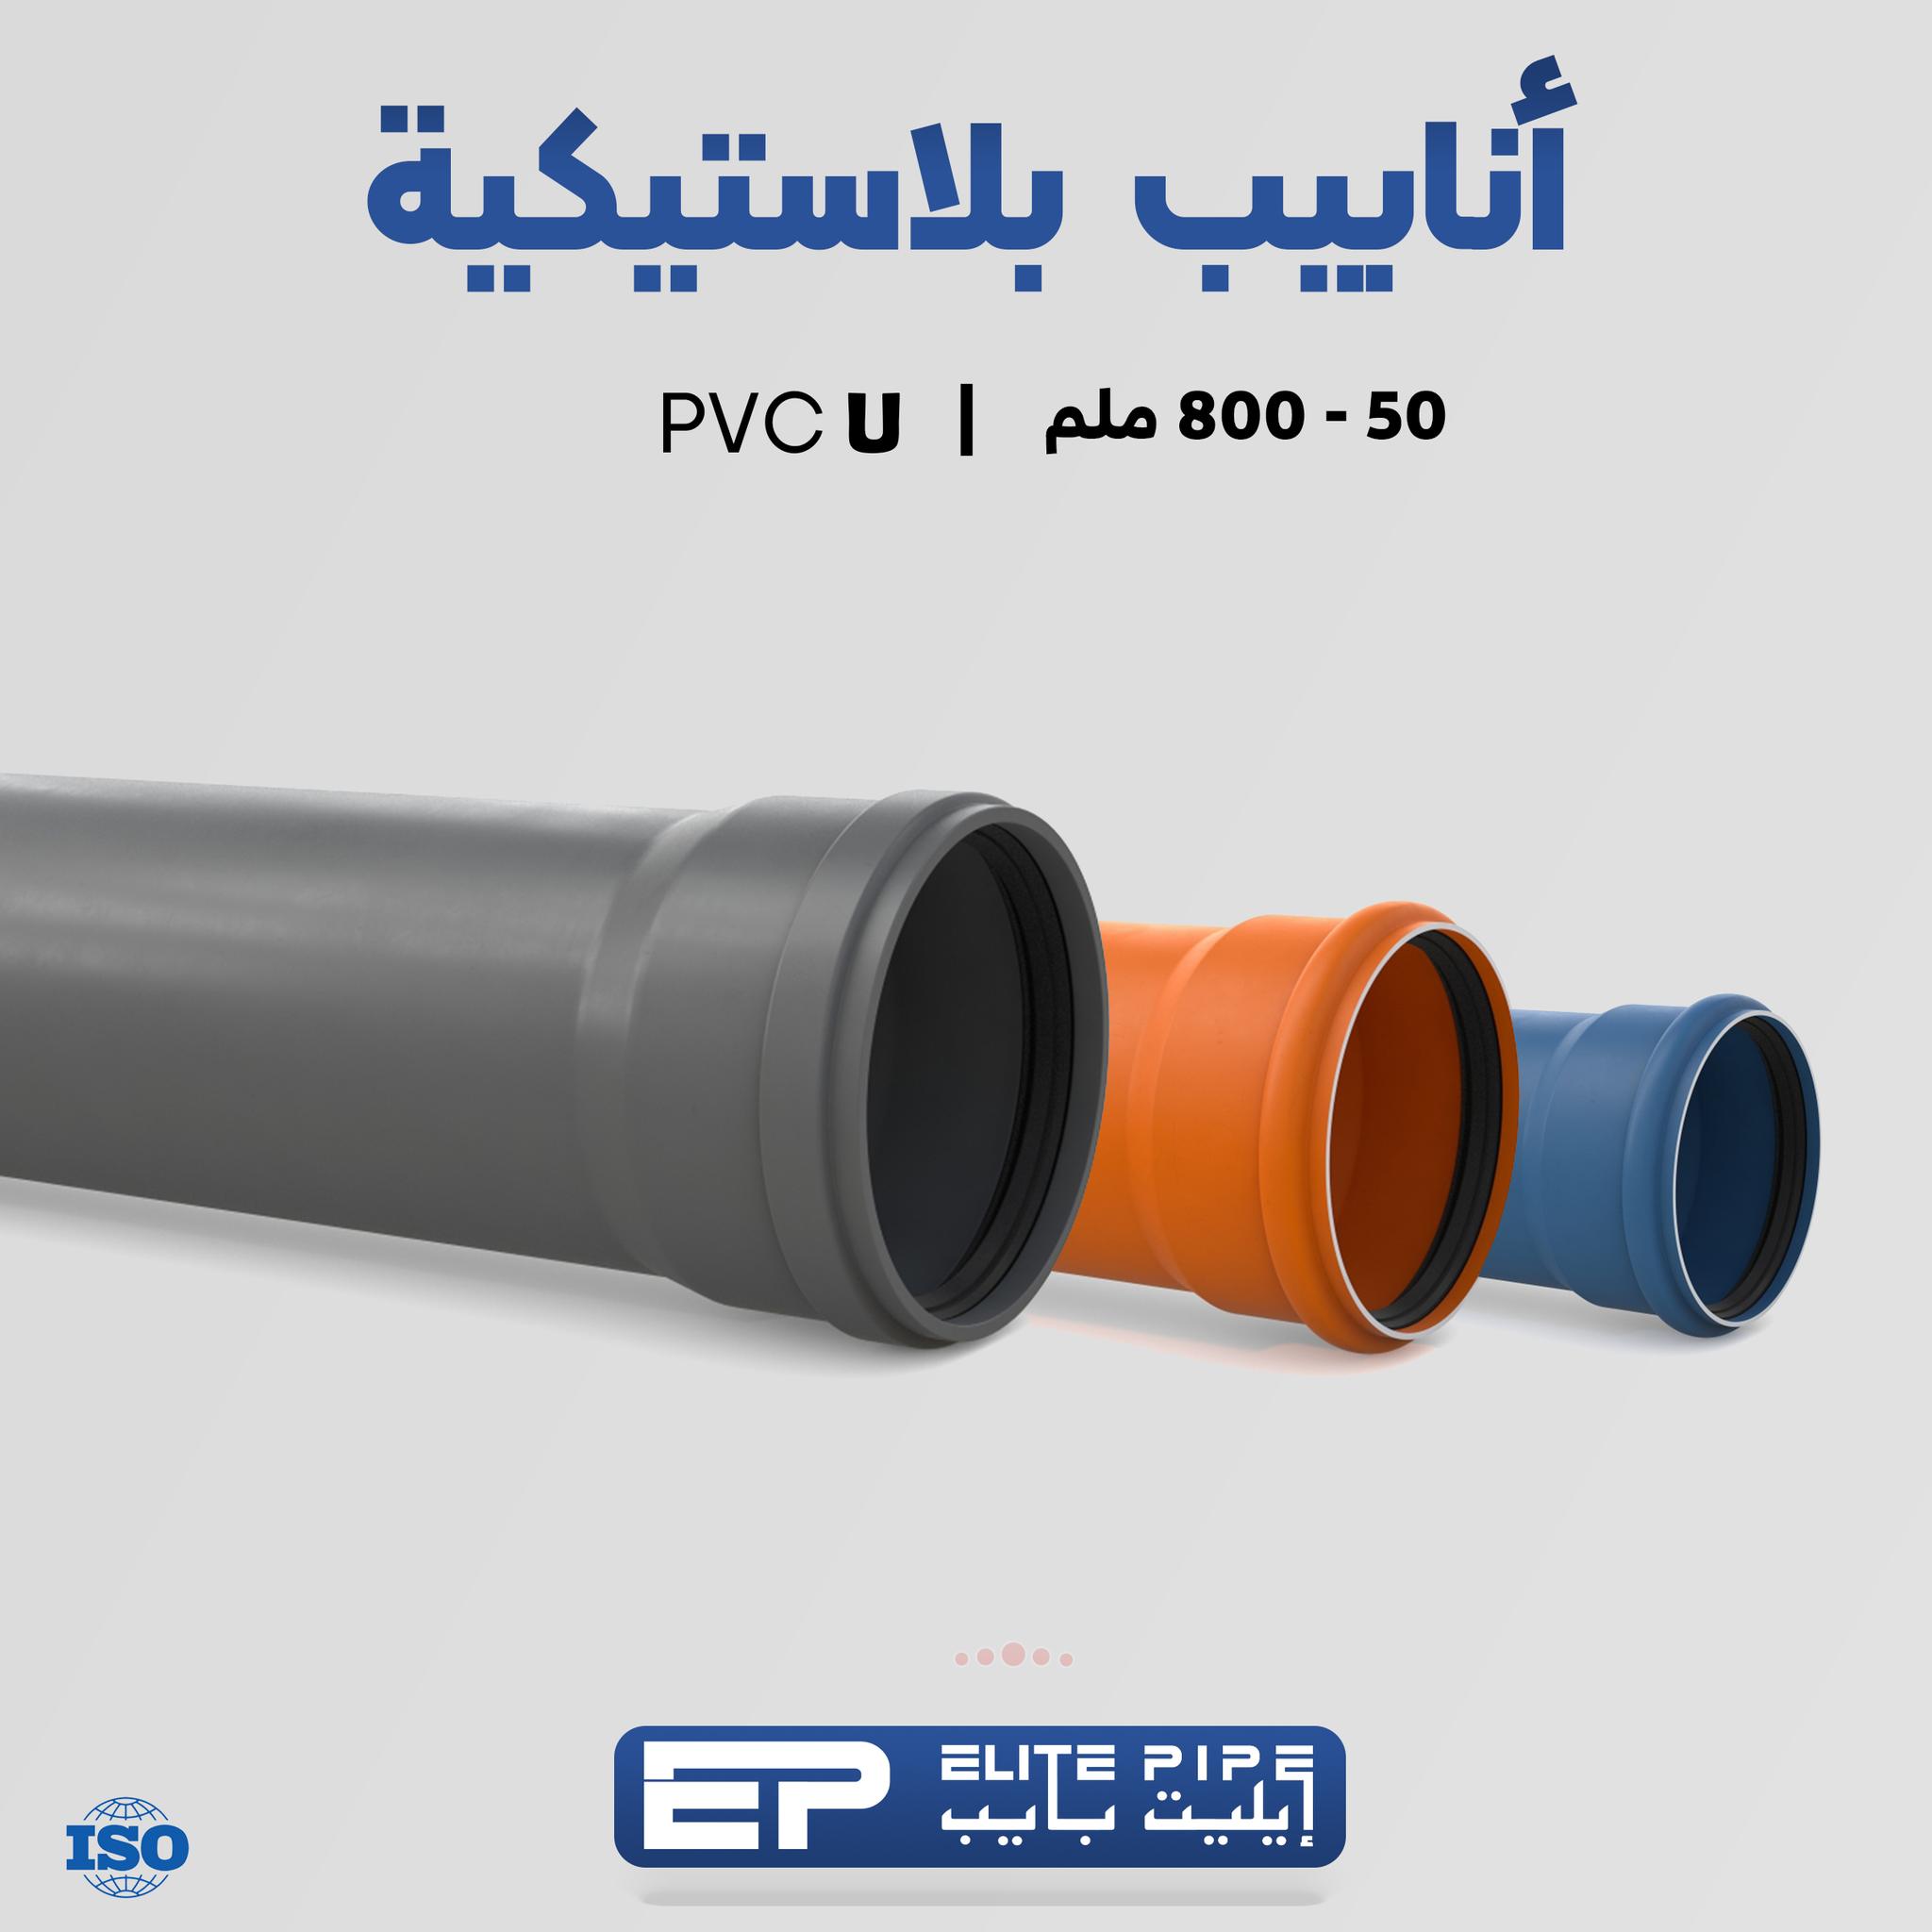 1686076335 903 Proudly elite pipe products according to German specifications in Iraq your